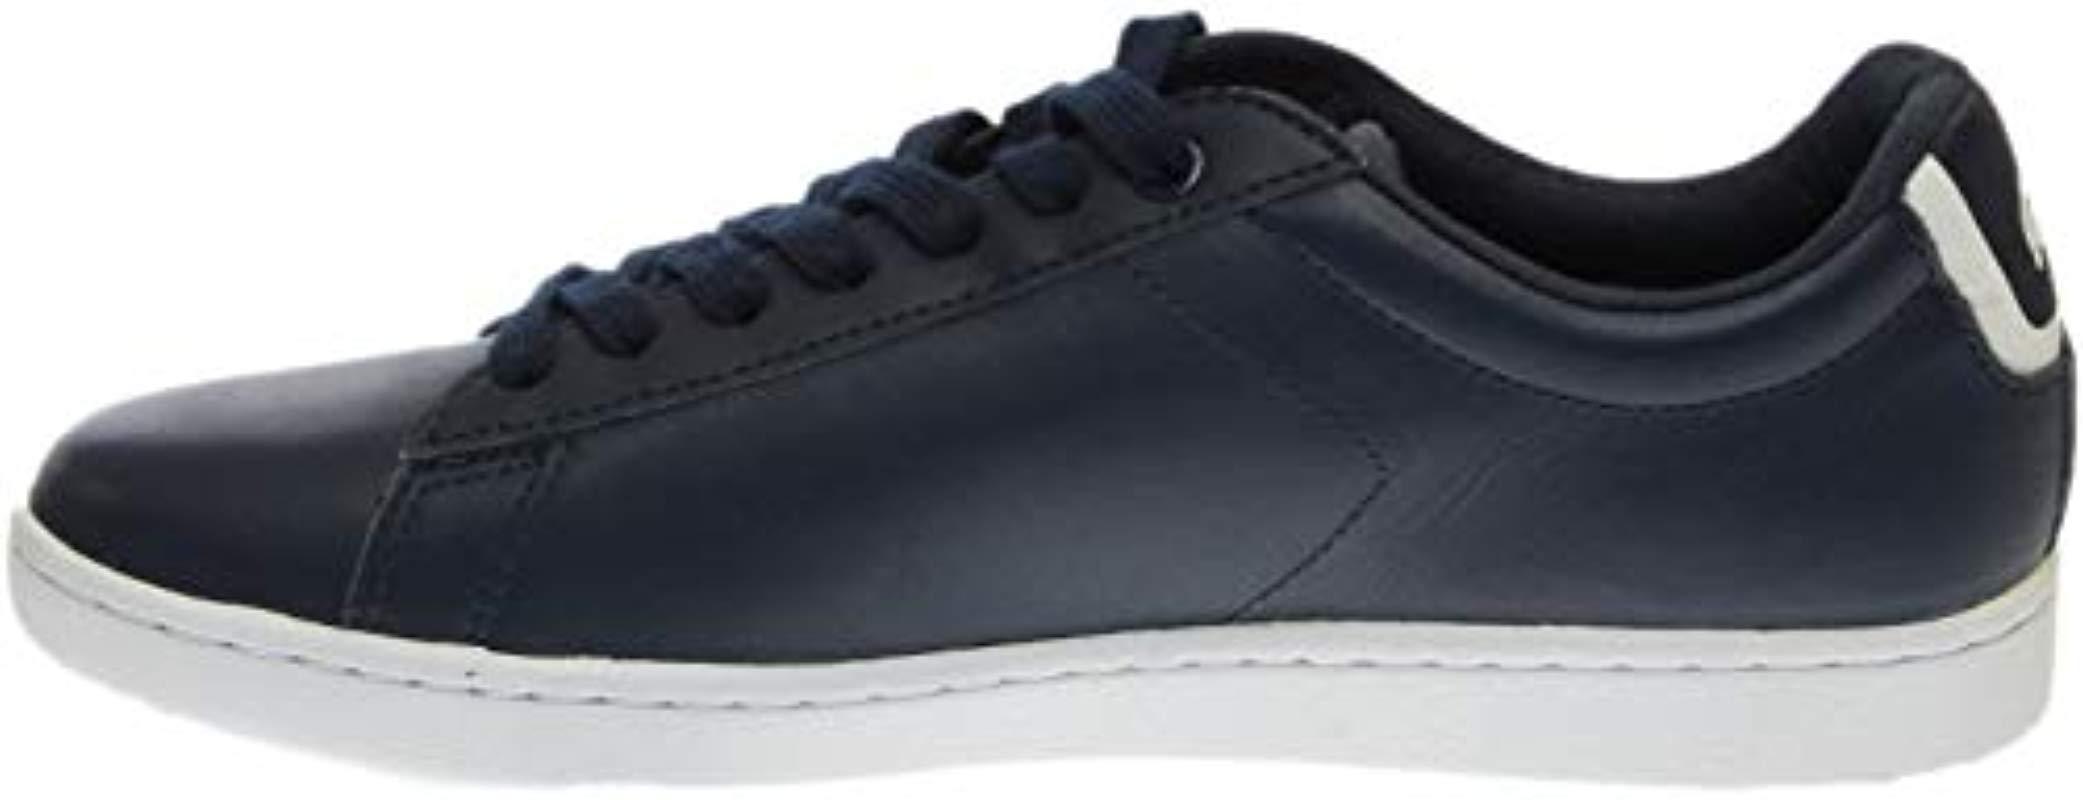 Lacoste Carnaby Bl 1 in Navy (Blue) - Save 40% - Lyst